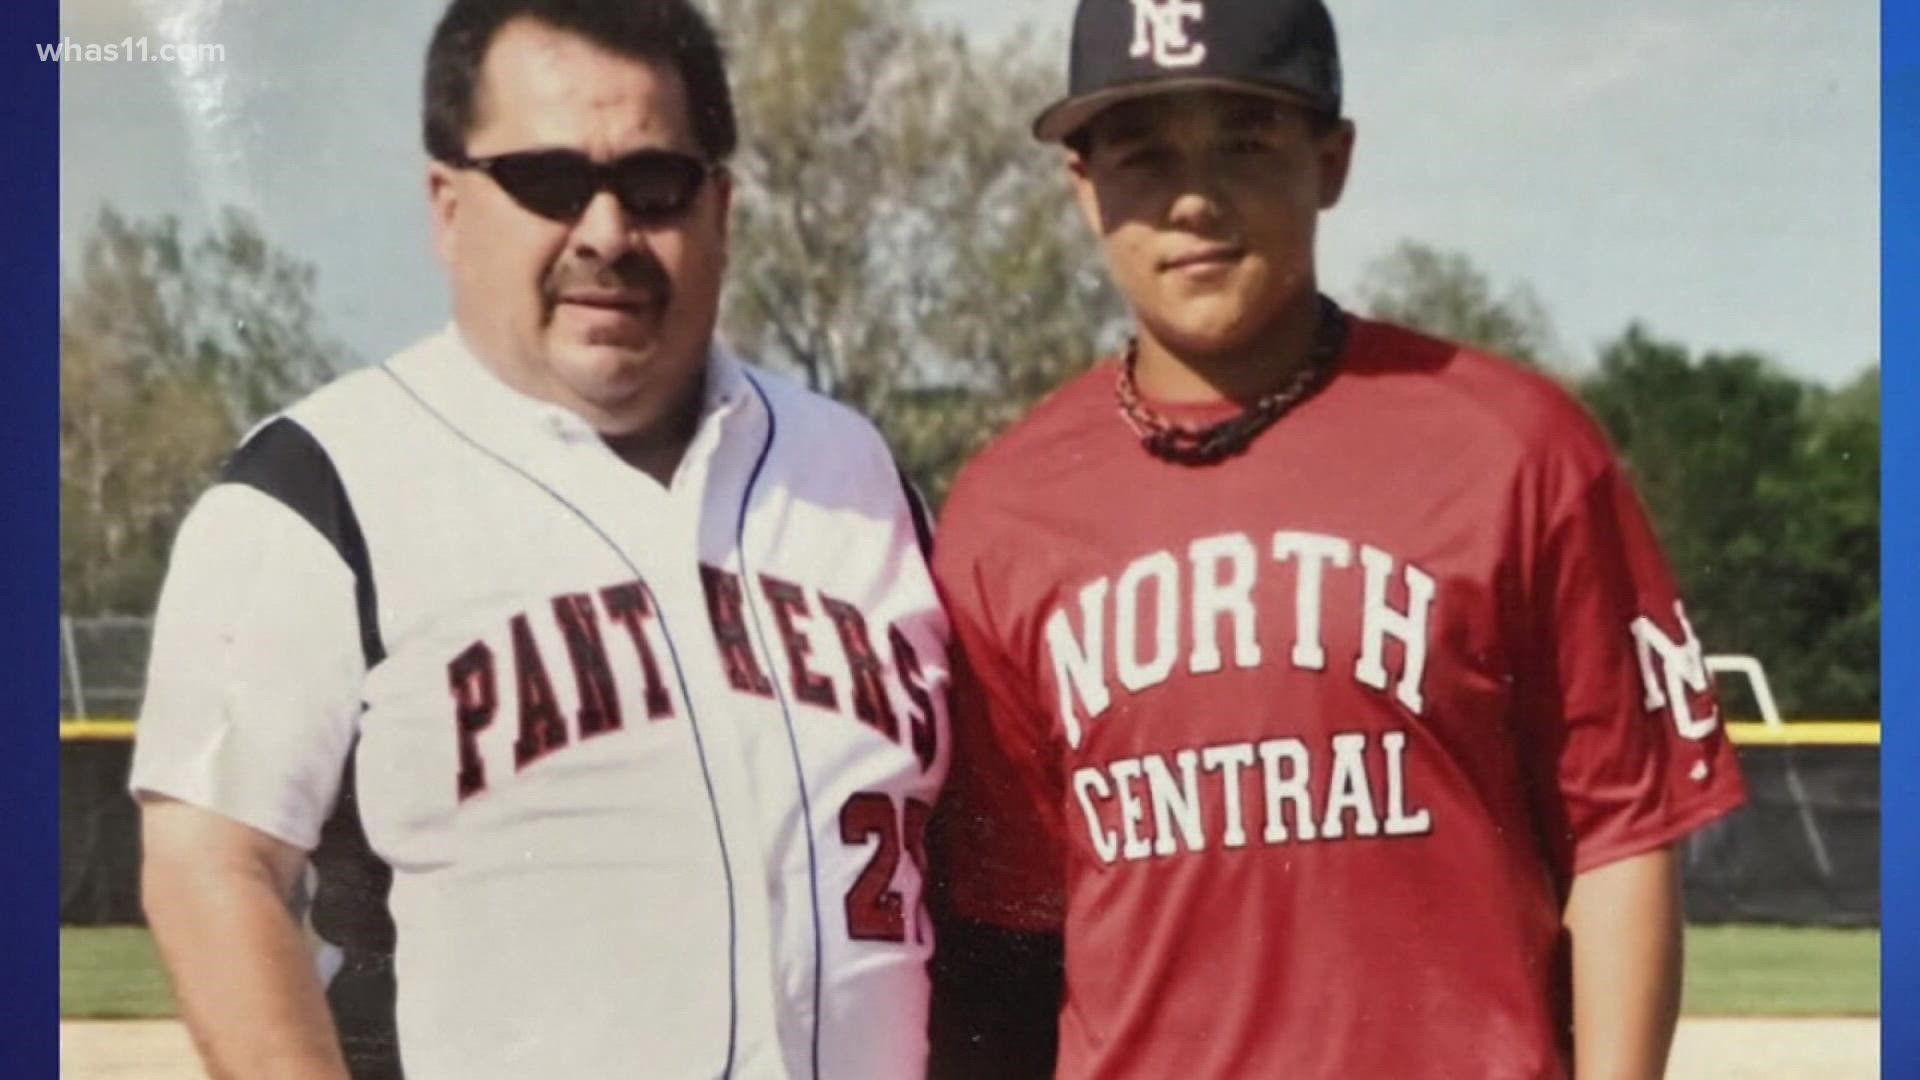 The student-athletes, staff and families of North Central High School lost their beloved coach Paul Loggan, a towering figure in Indianapolis for more than 30 years.